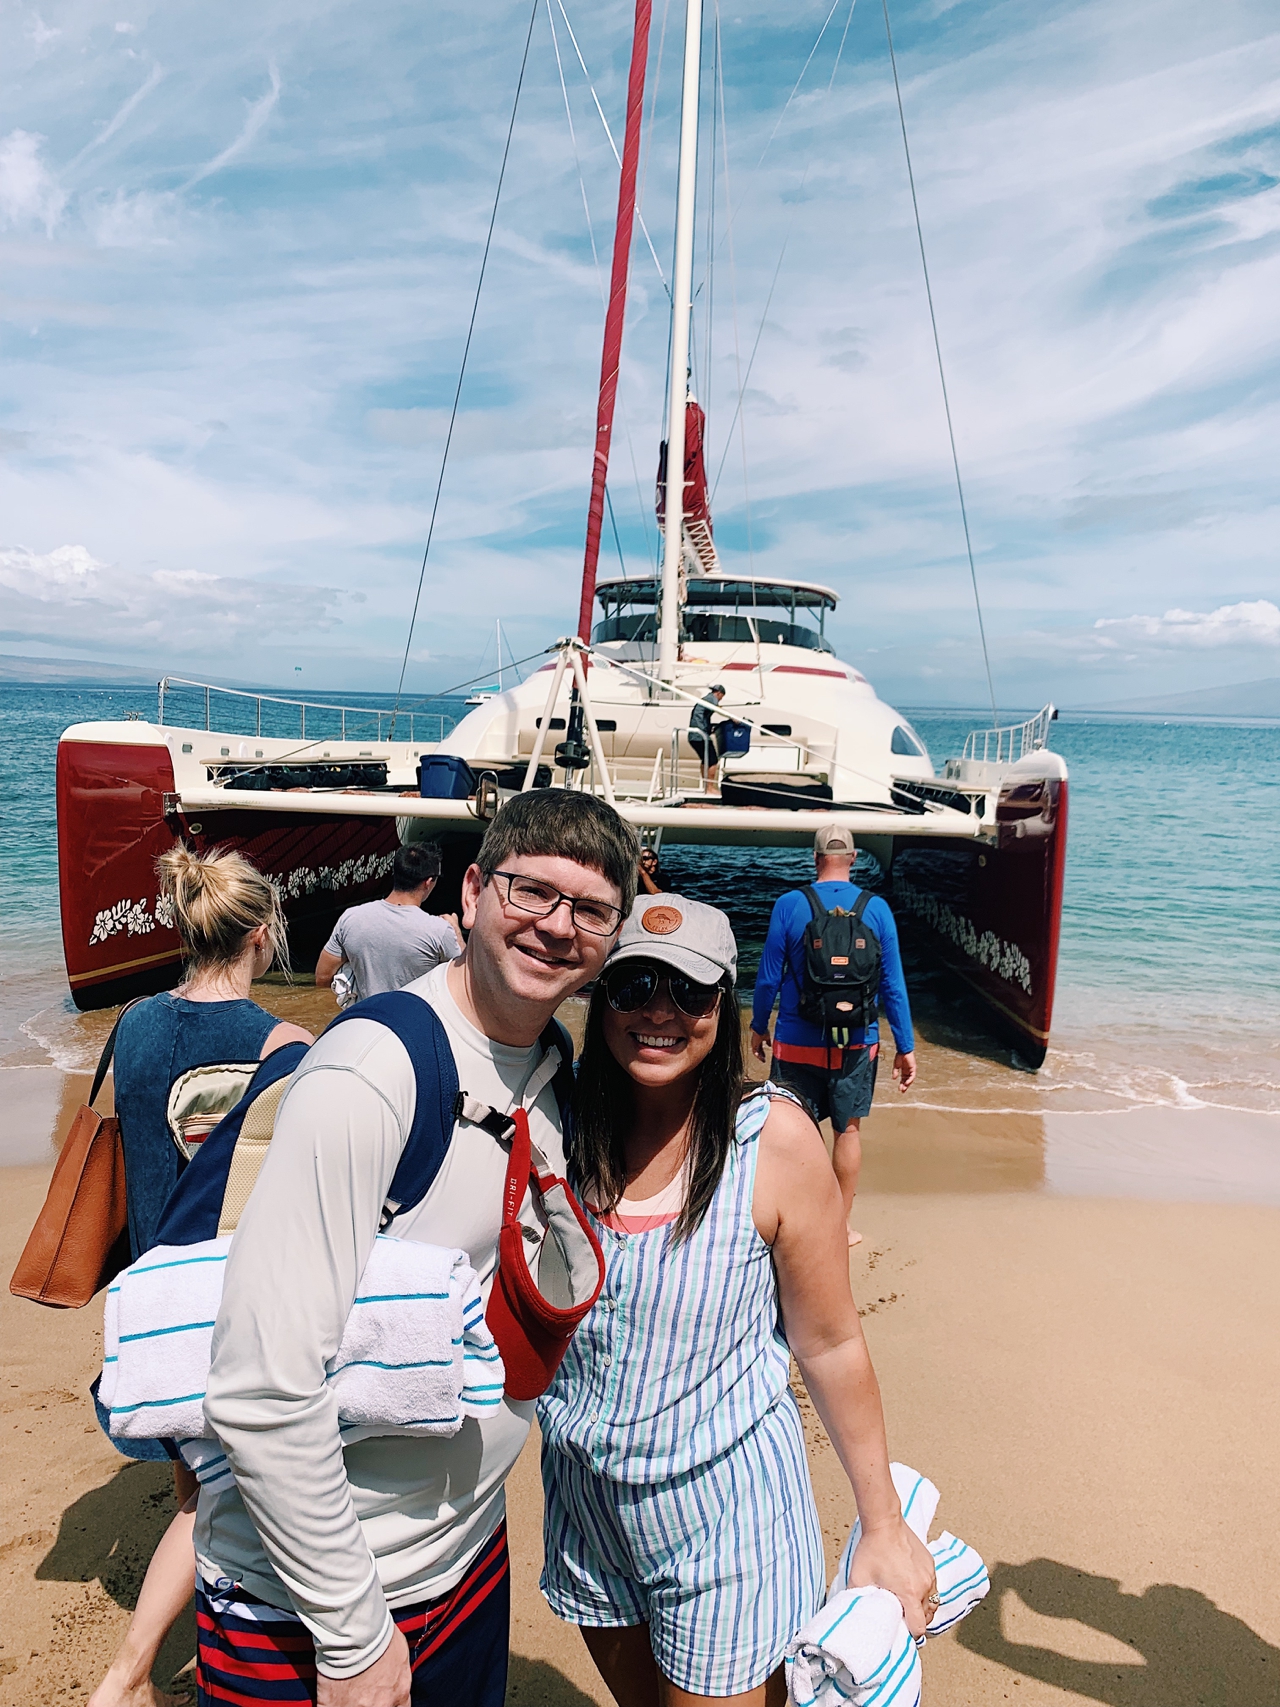 John and Brittney Naylor standing together in front of catamaran in Maui Hawaii